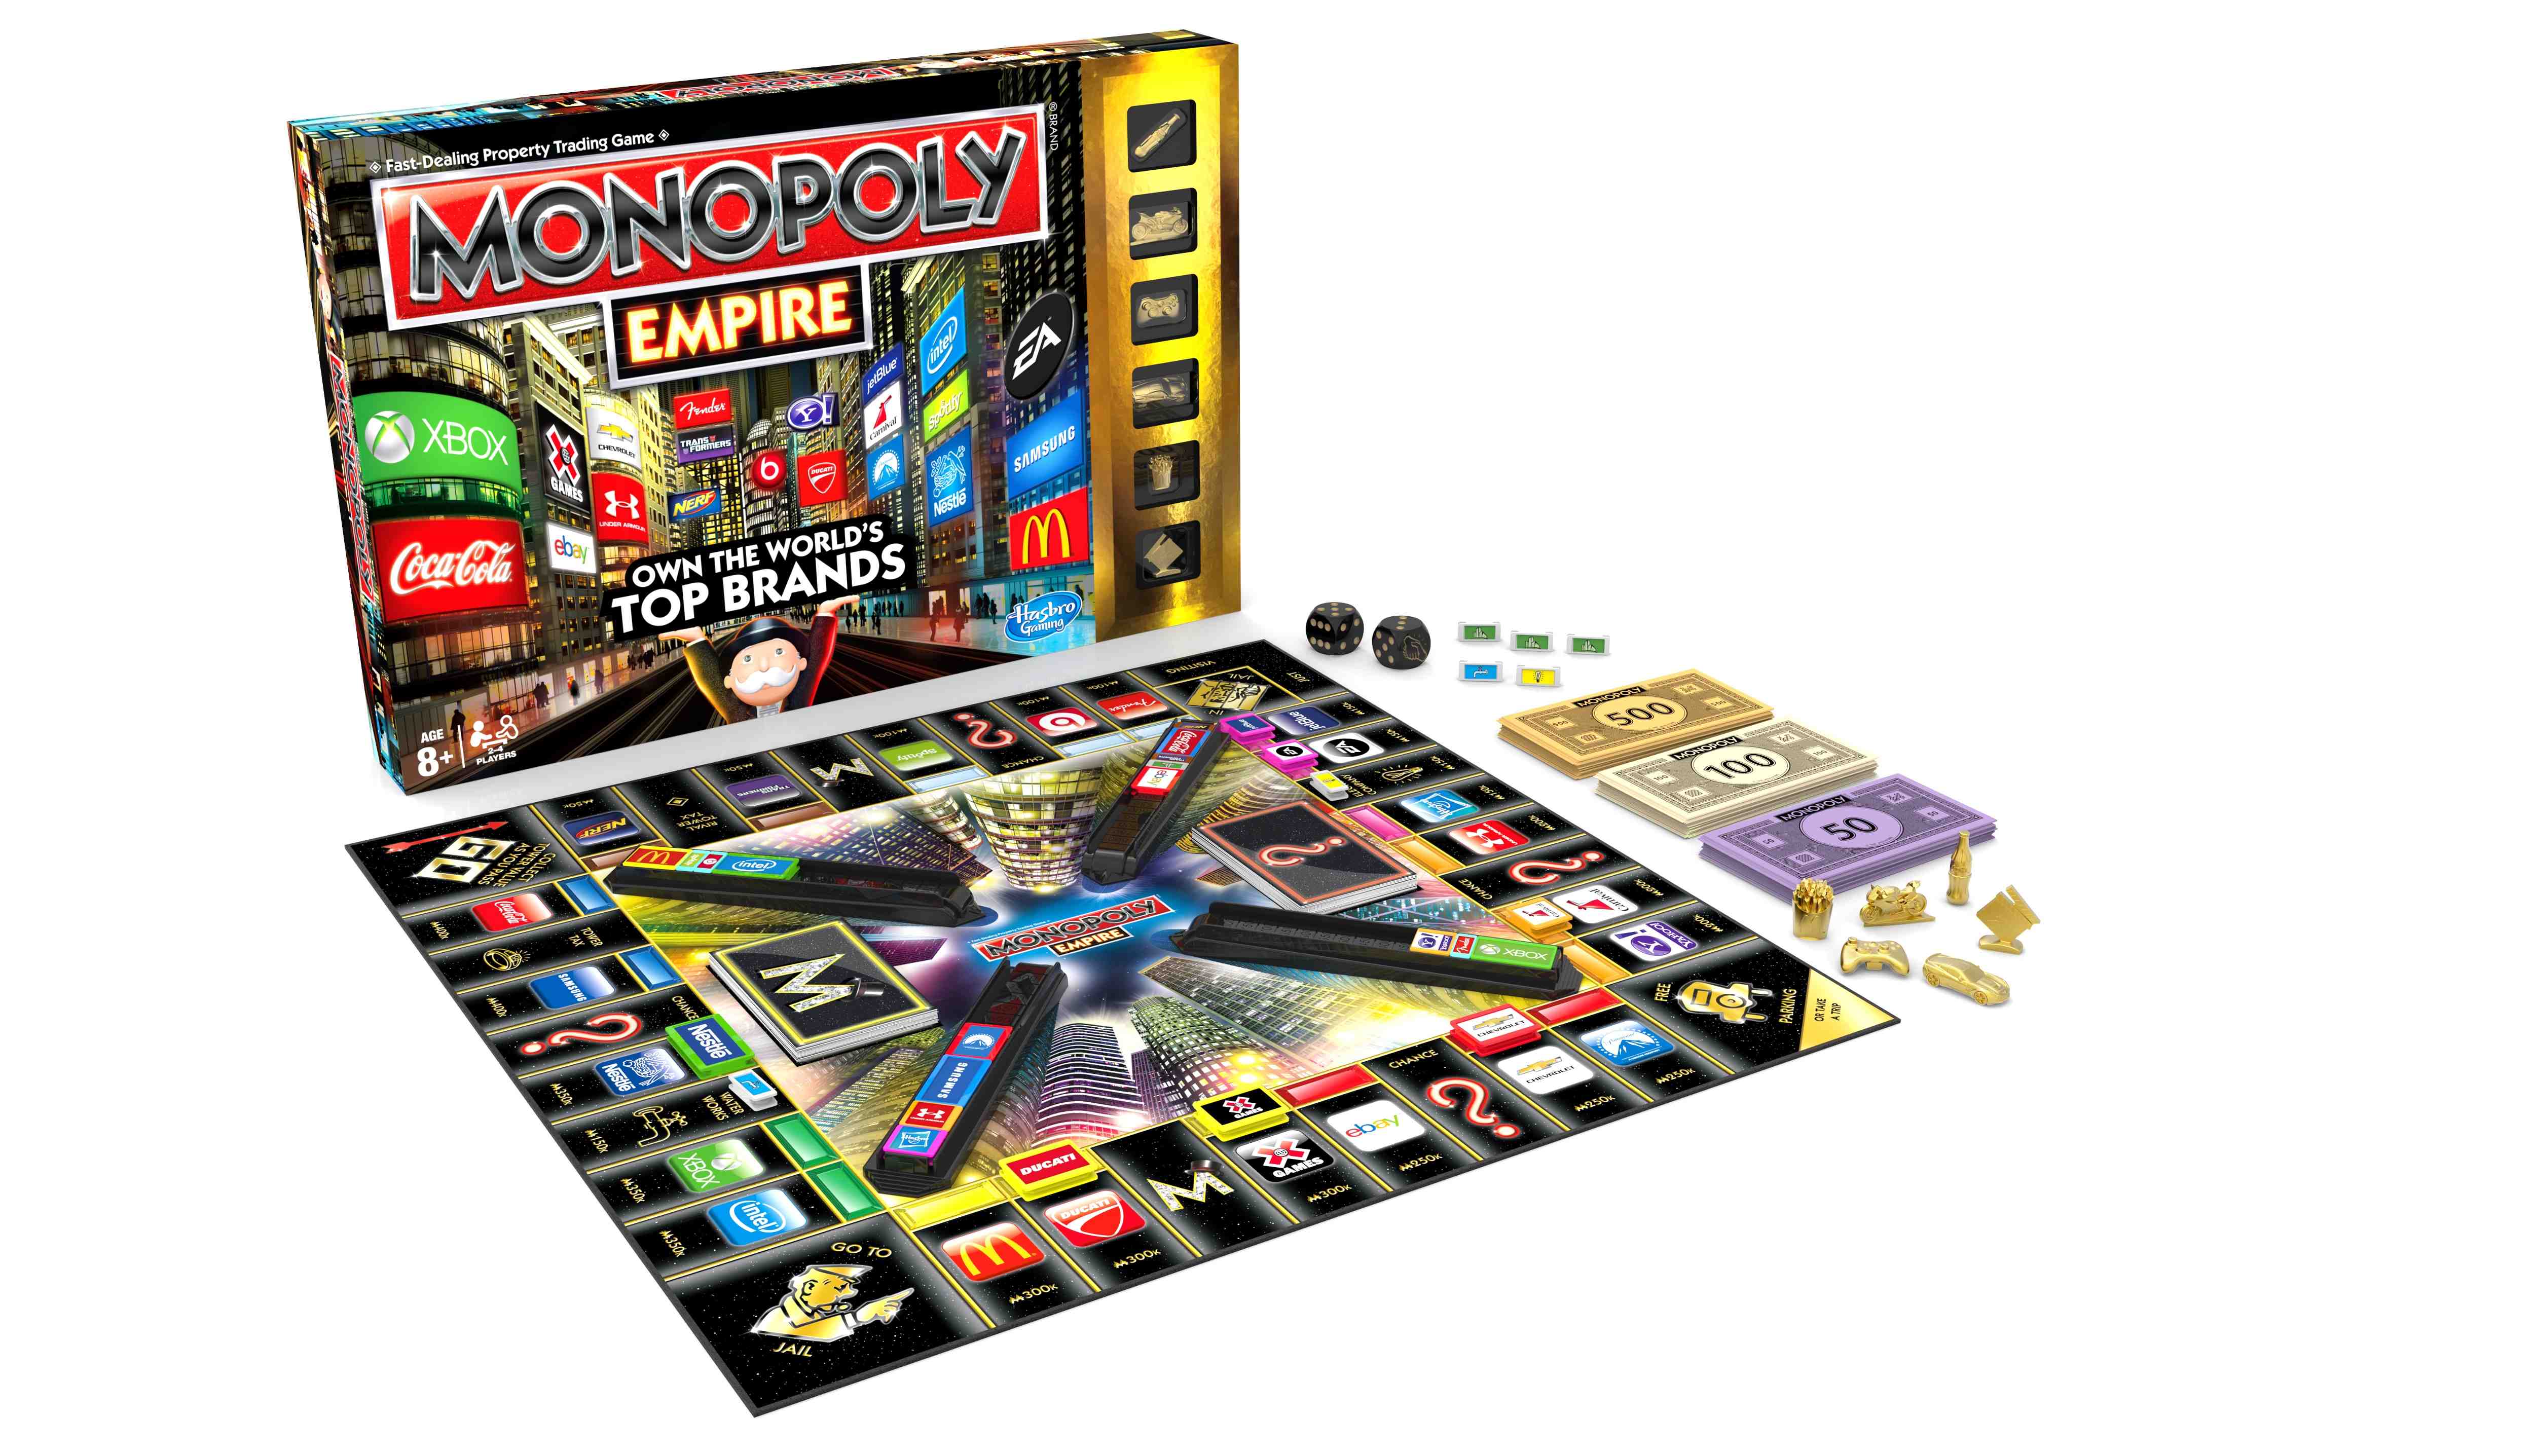 Monopoly Empire Review and Giveaway